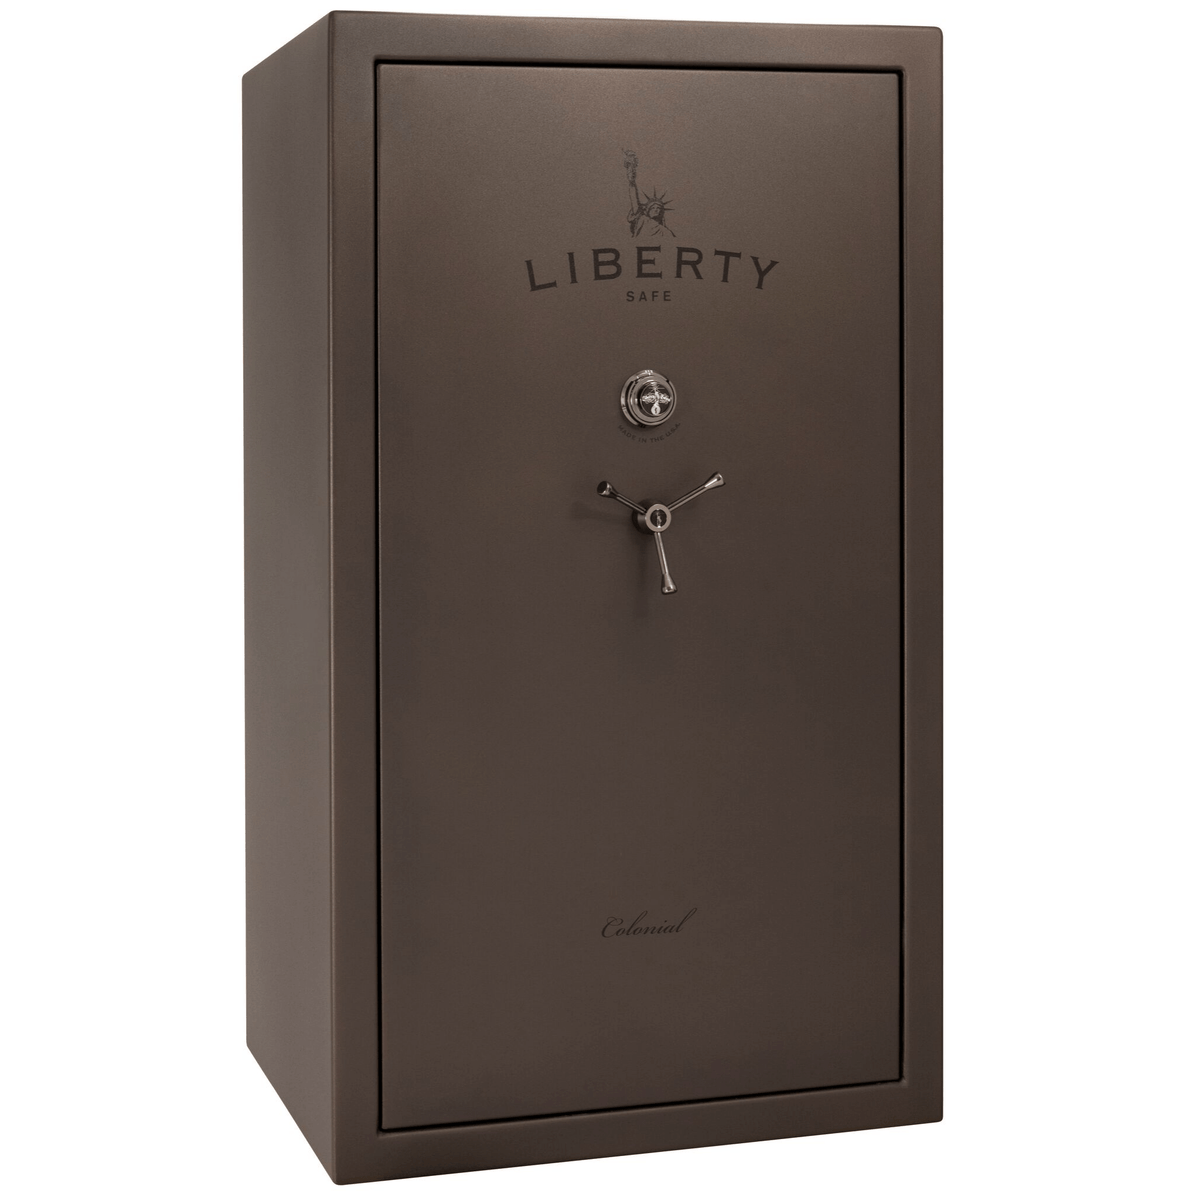 Liberty Colonial 50 Safe in Textured Bronze with Black Chrome Mechanical Lock.